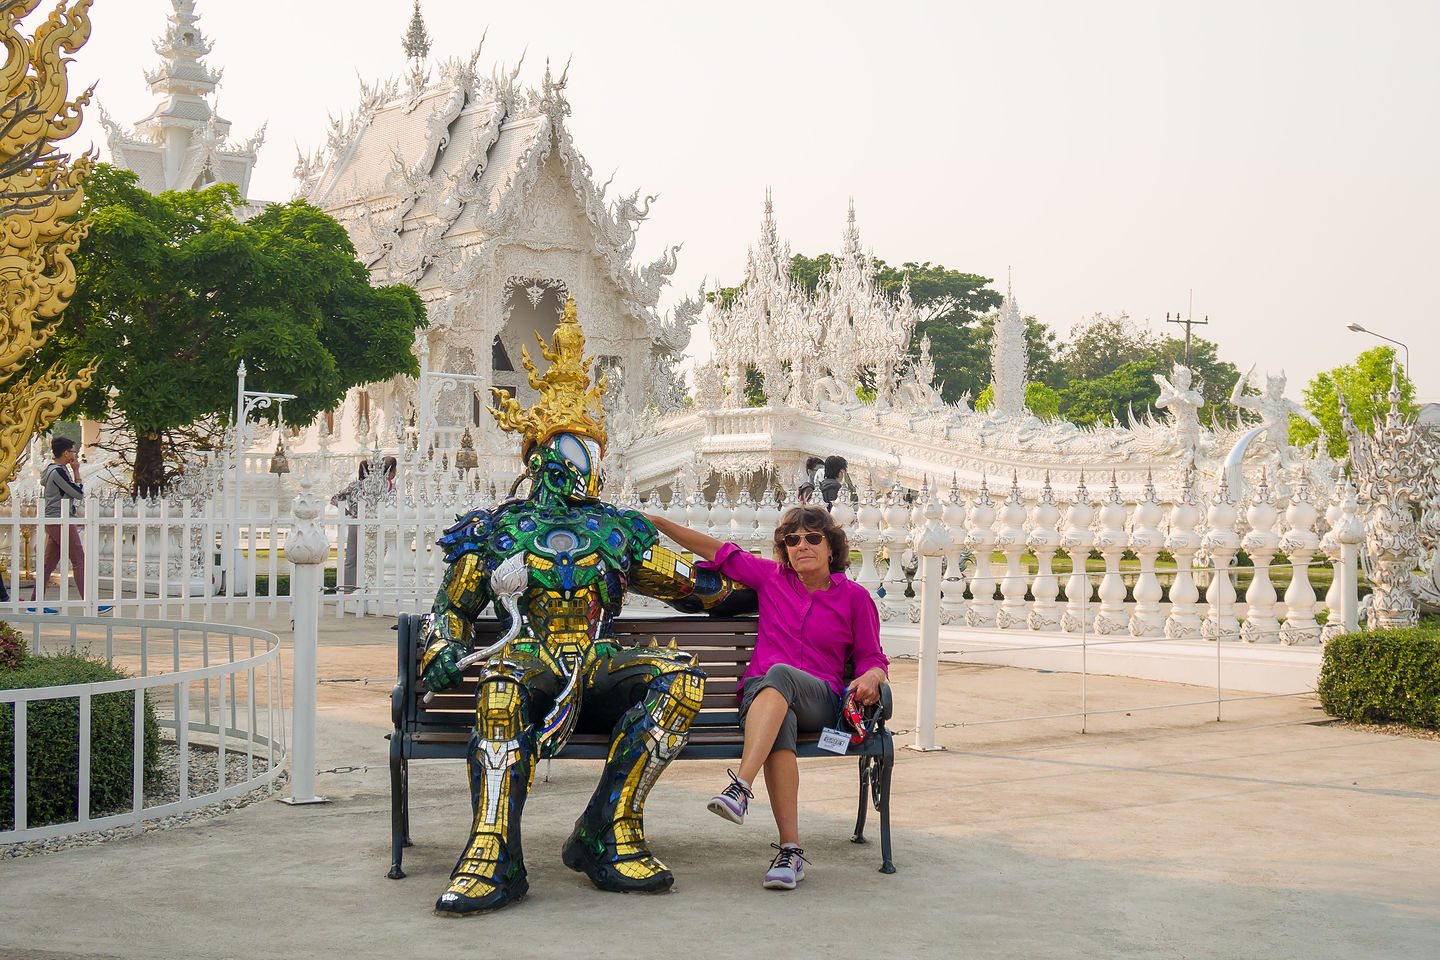 Lolo making friends at the White Temple